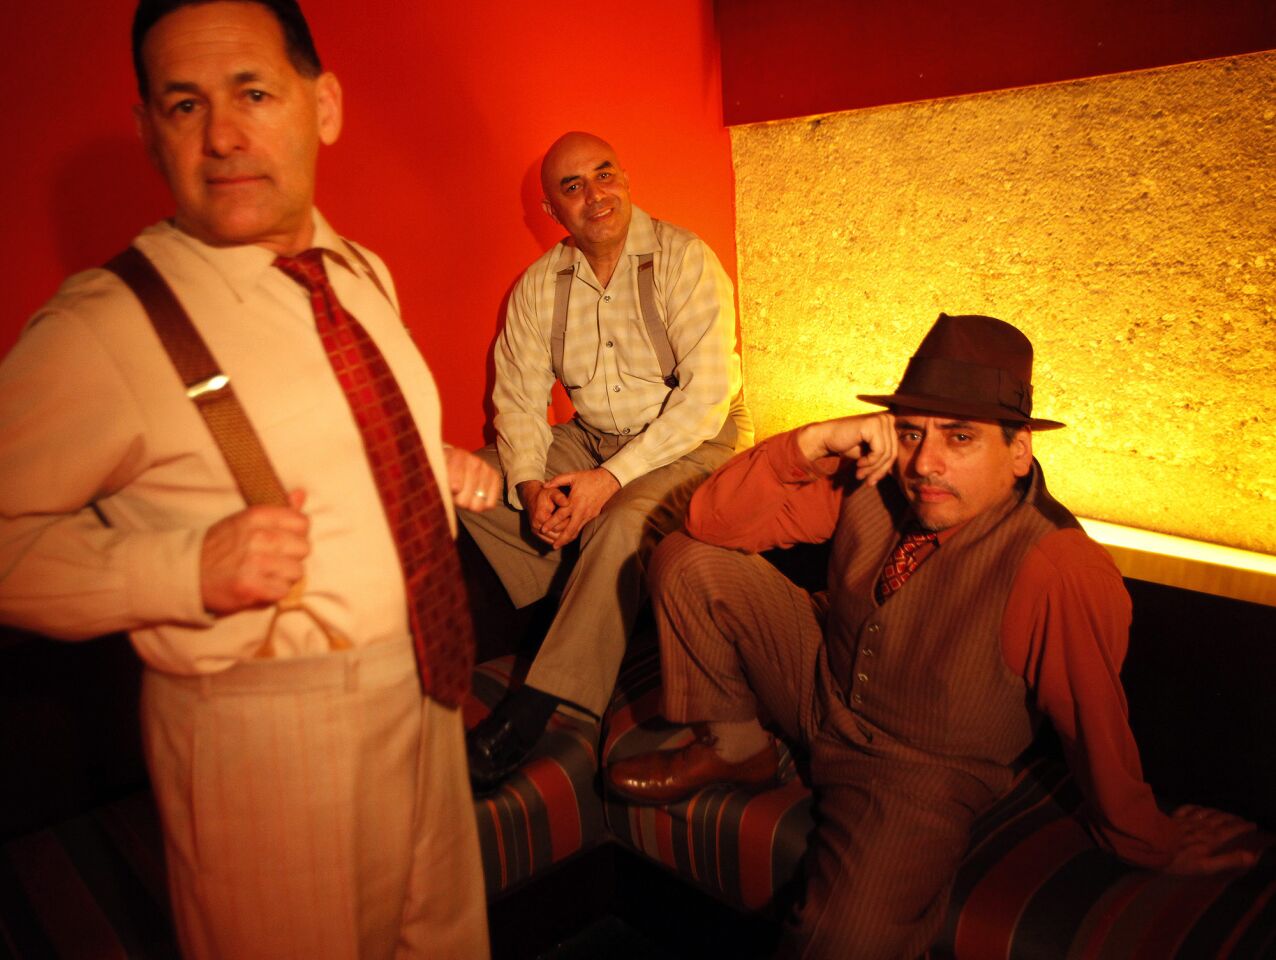 Ric Salinas, left, Herbert Siguenza and Richard Montoya, of the three-man Latino theater group Culture Clash, brought their "Chavez Ravine: An L.A. Revival" to the Kirk Douglas Theatre to mark the group's 30th anniversary. The play ran from Feb. 4 through March 1.